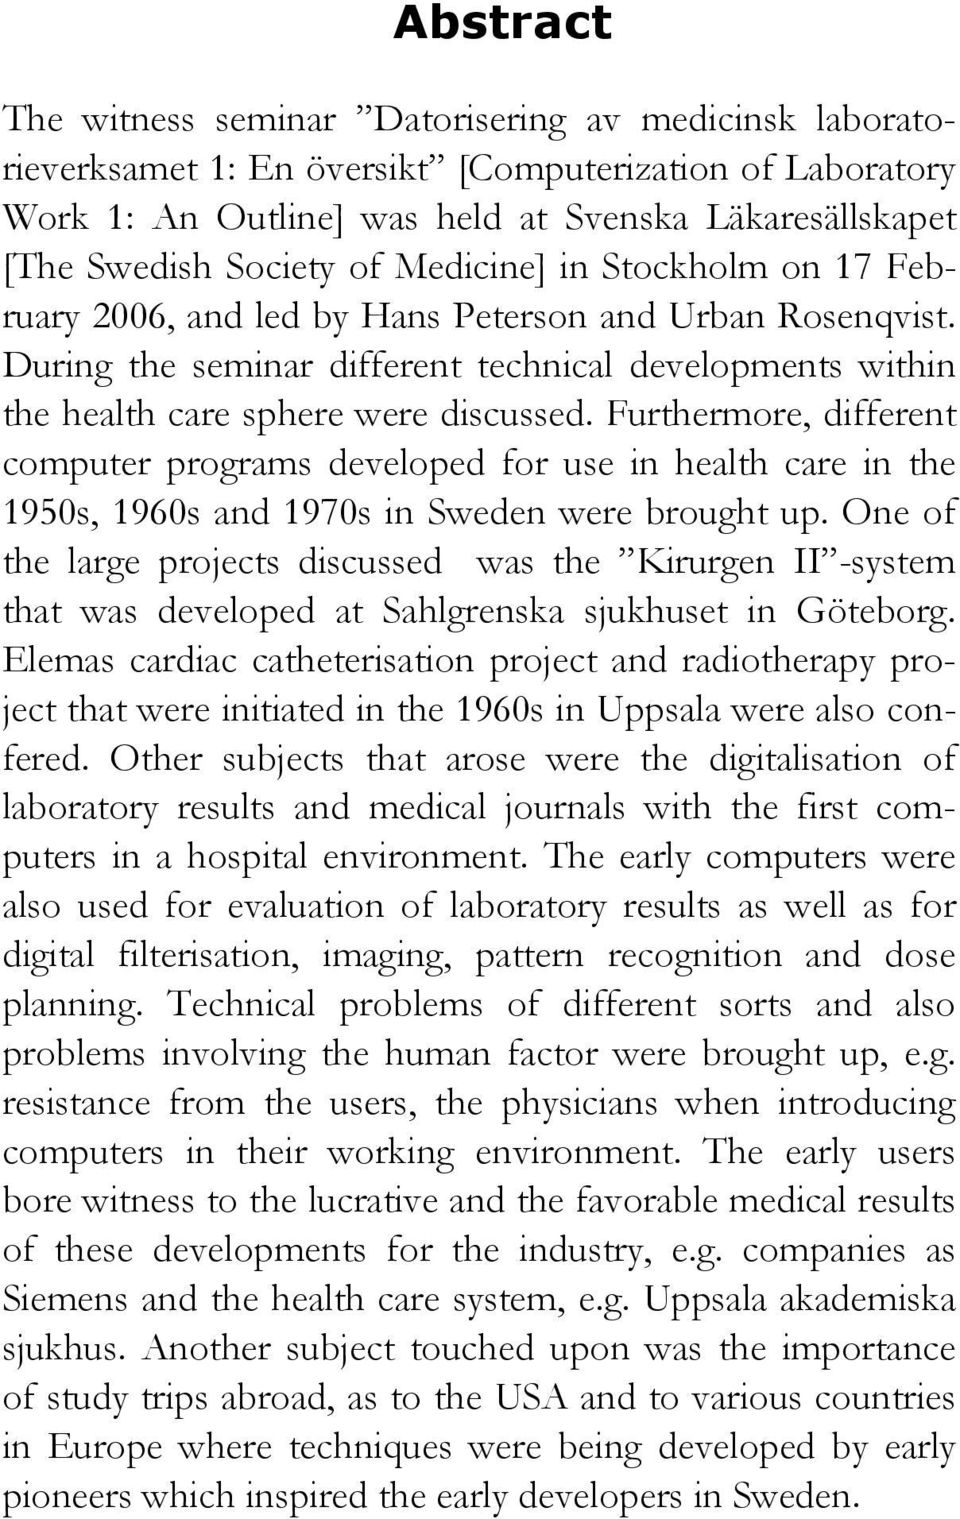 Furthermore, different computer programs developed for use in health care in the 1950s, 1960s and 1970s in Sweden were brought up.